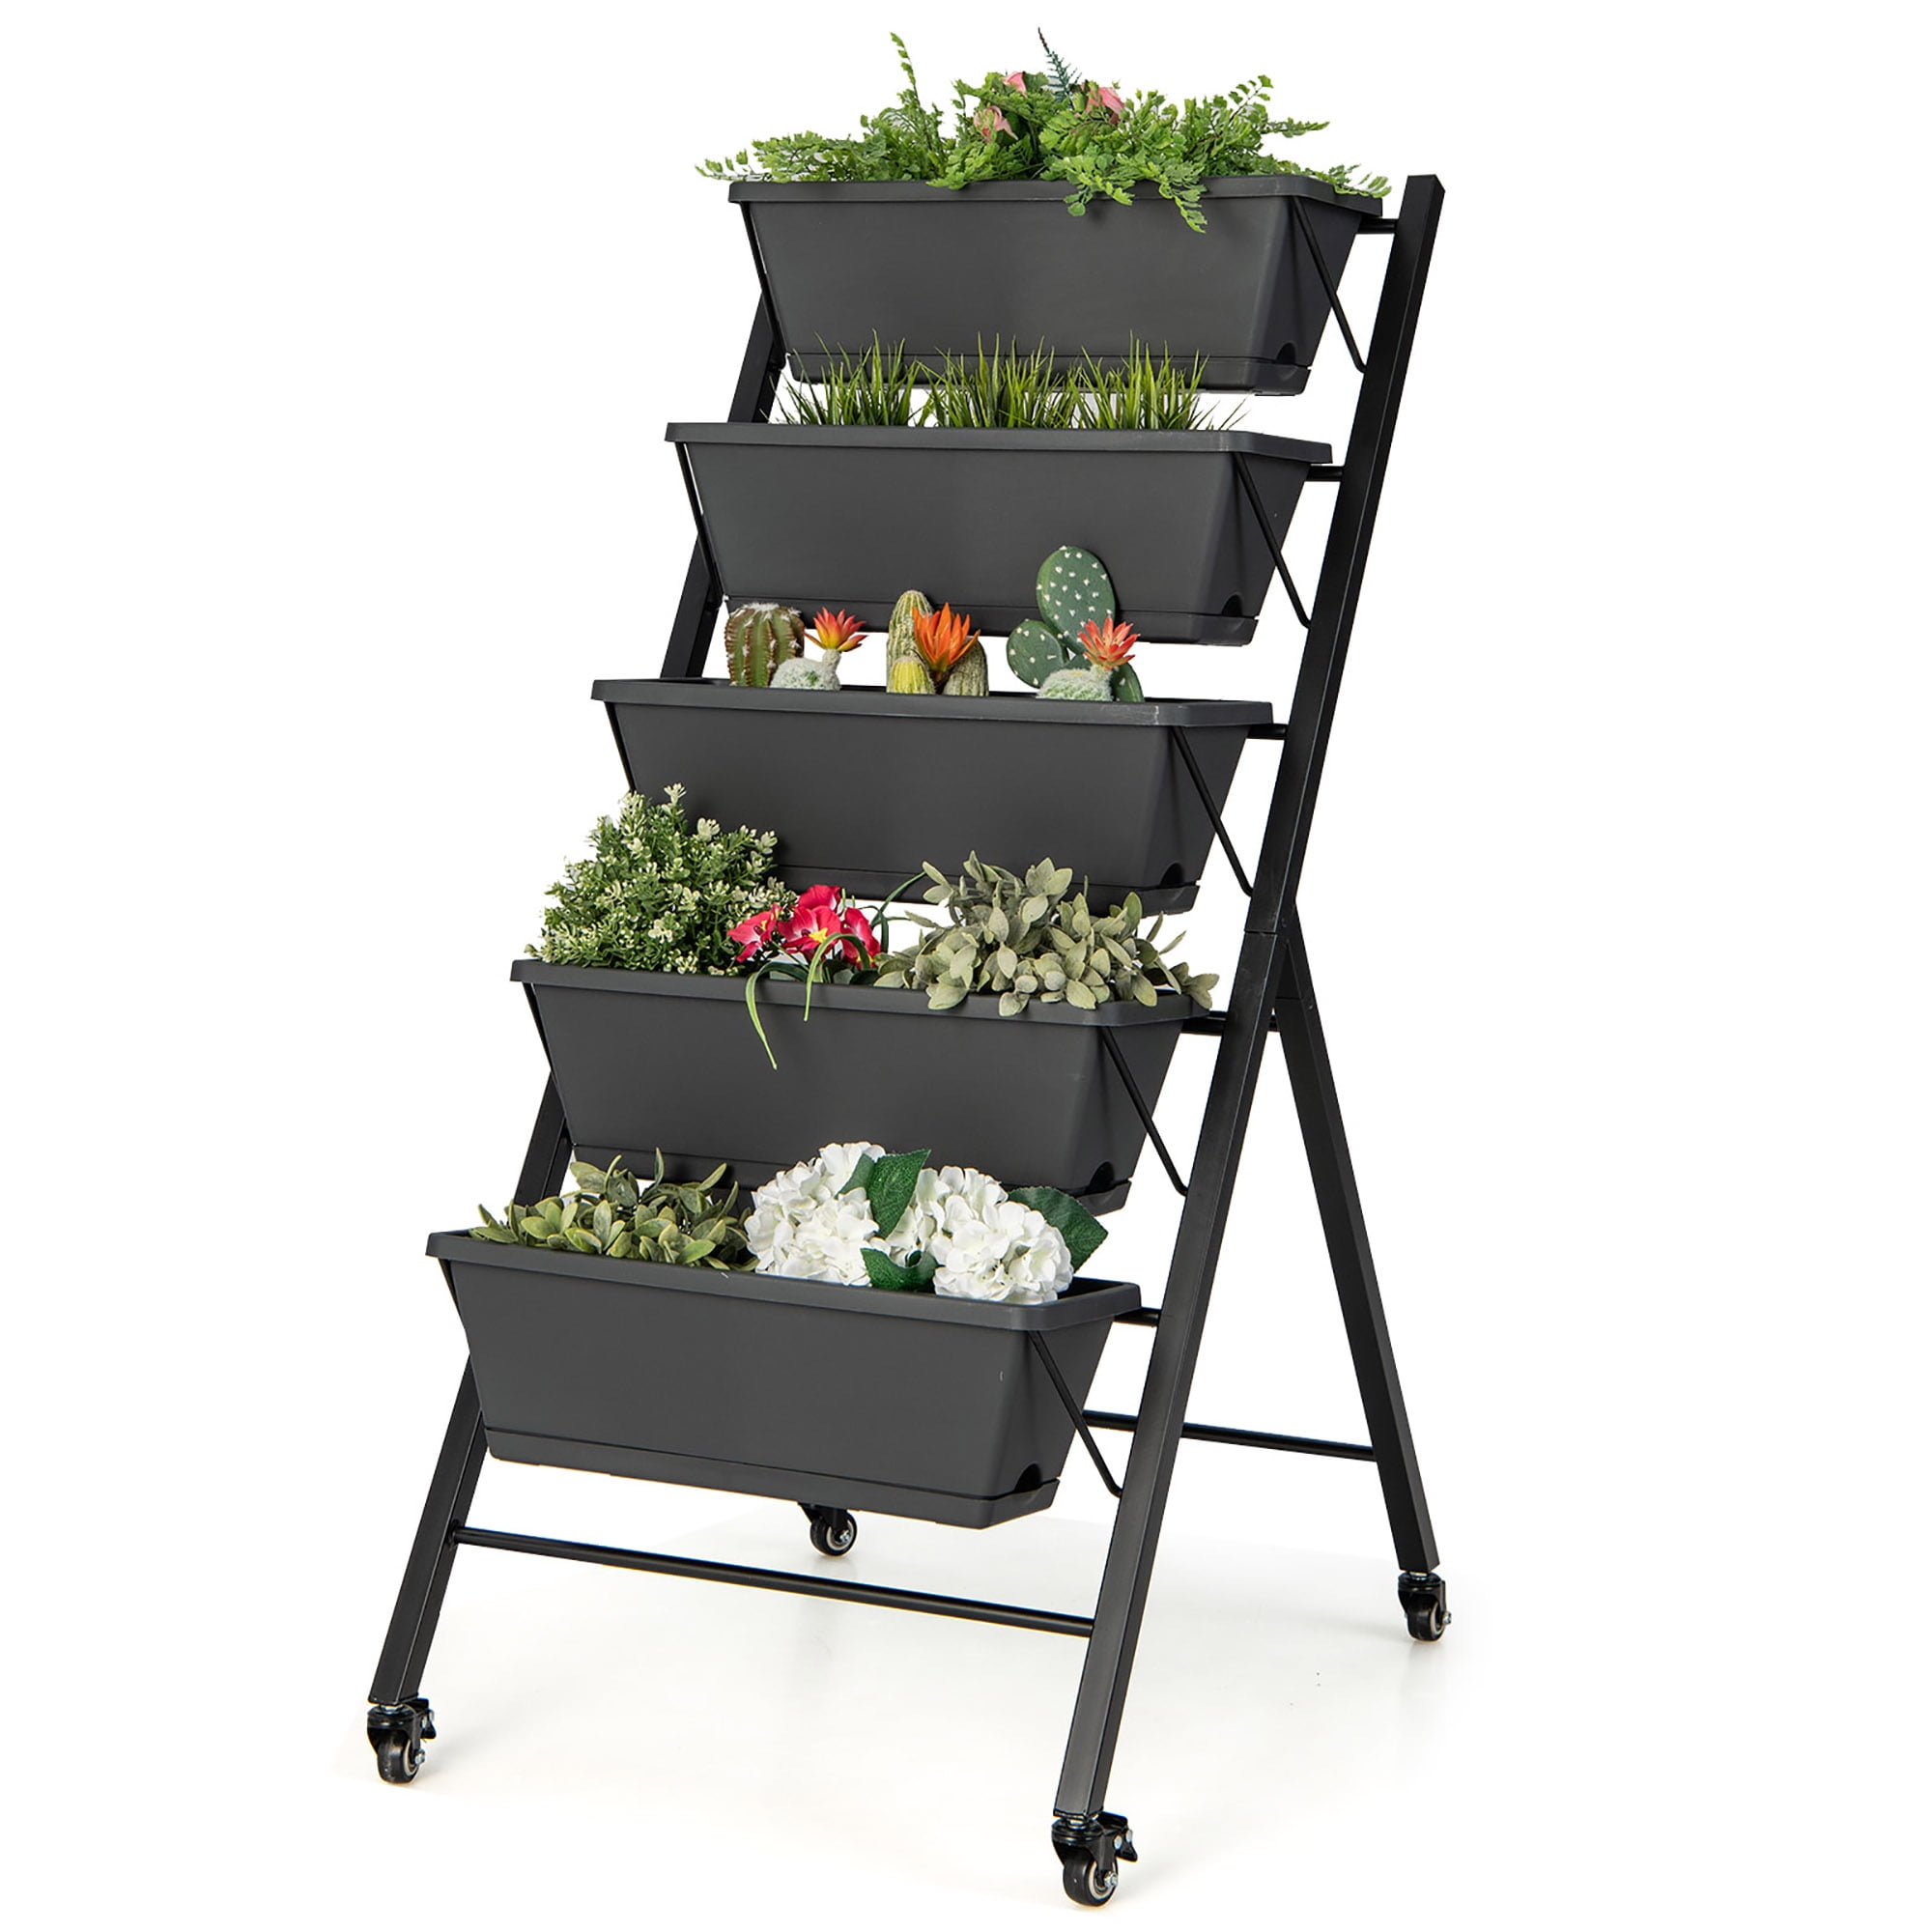 Vineego Raised Garden Bed with Legs, Mobile Planter Box Elevated on Wheels Portable Planter Cart for Vegetable Herbs Potted Plants Flowers, Size: 28.7